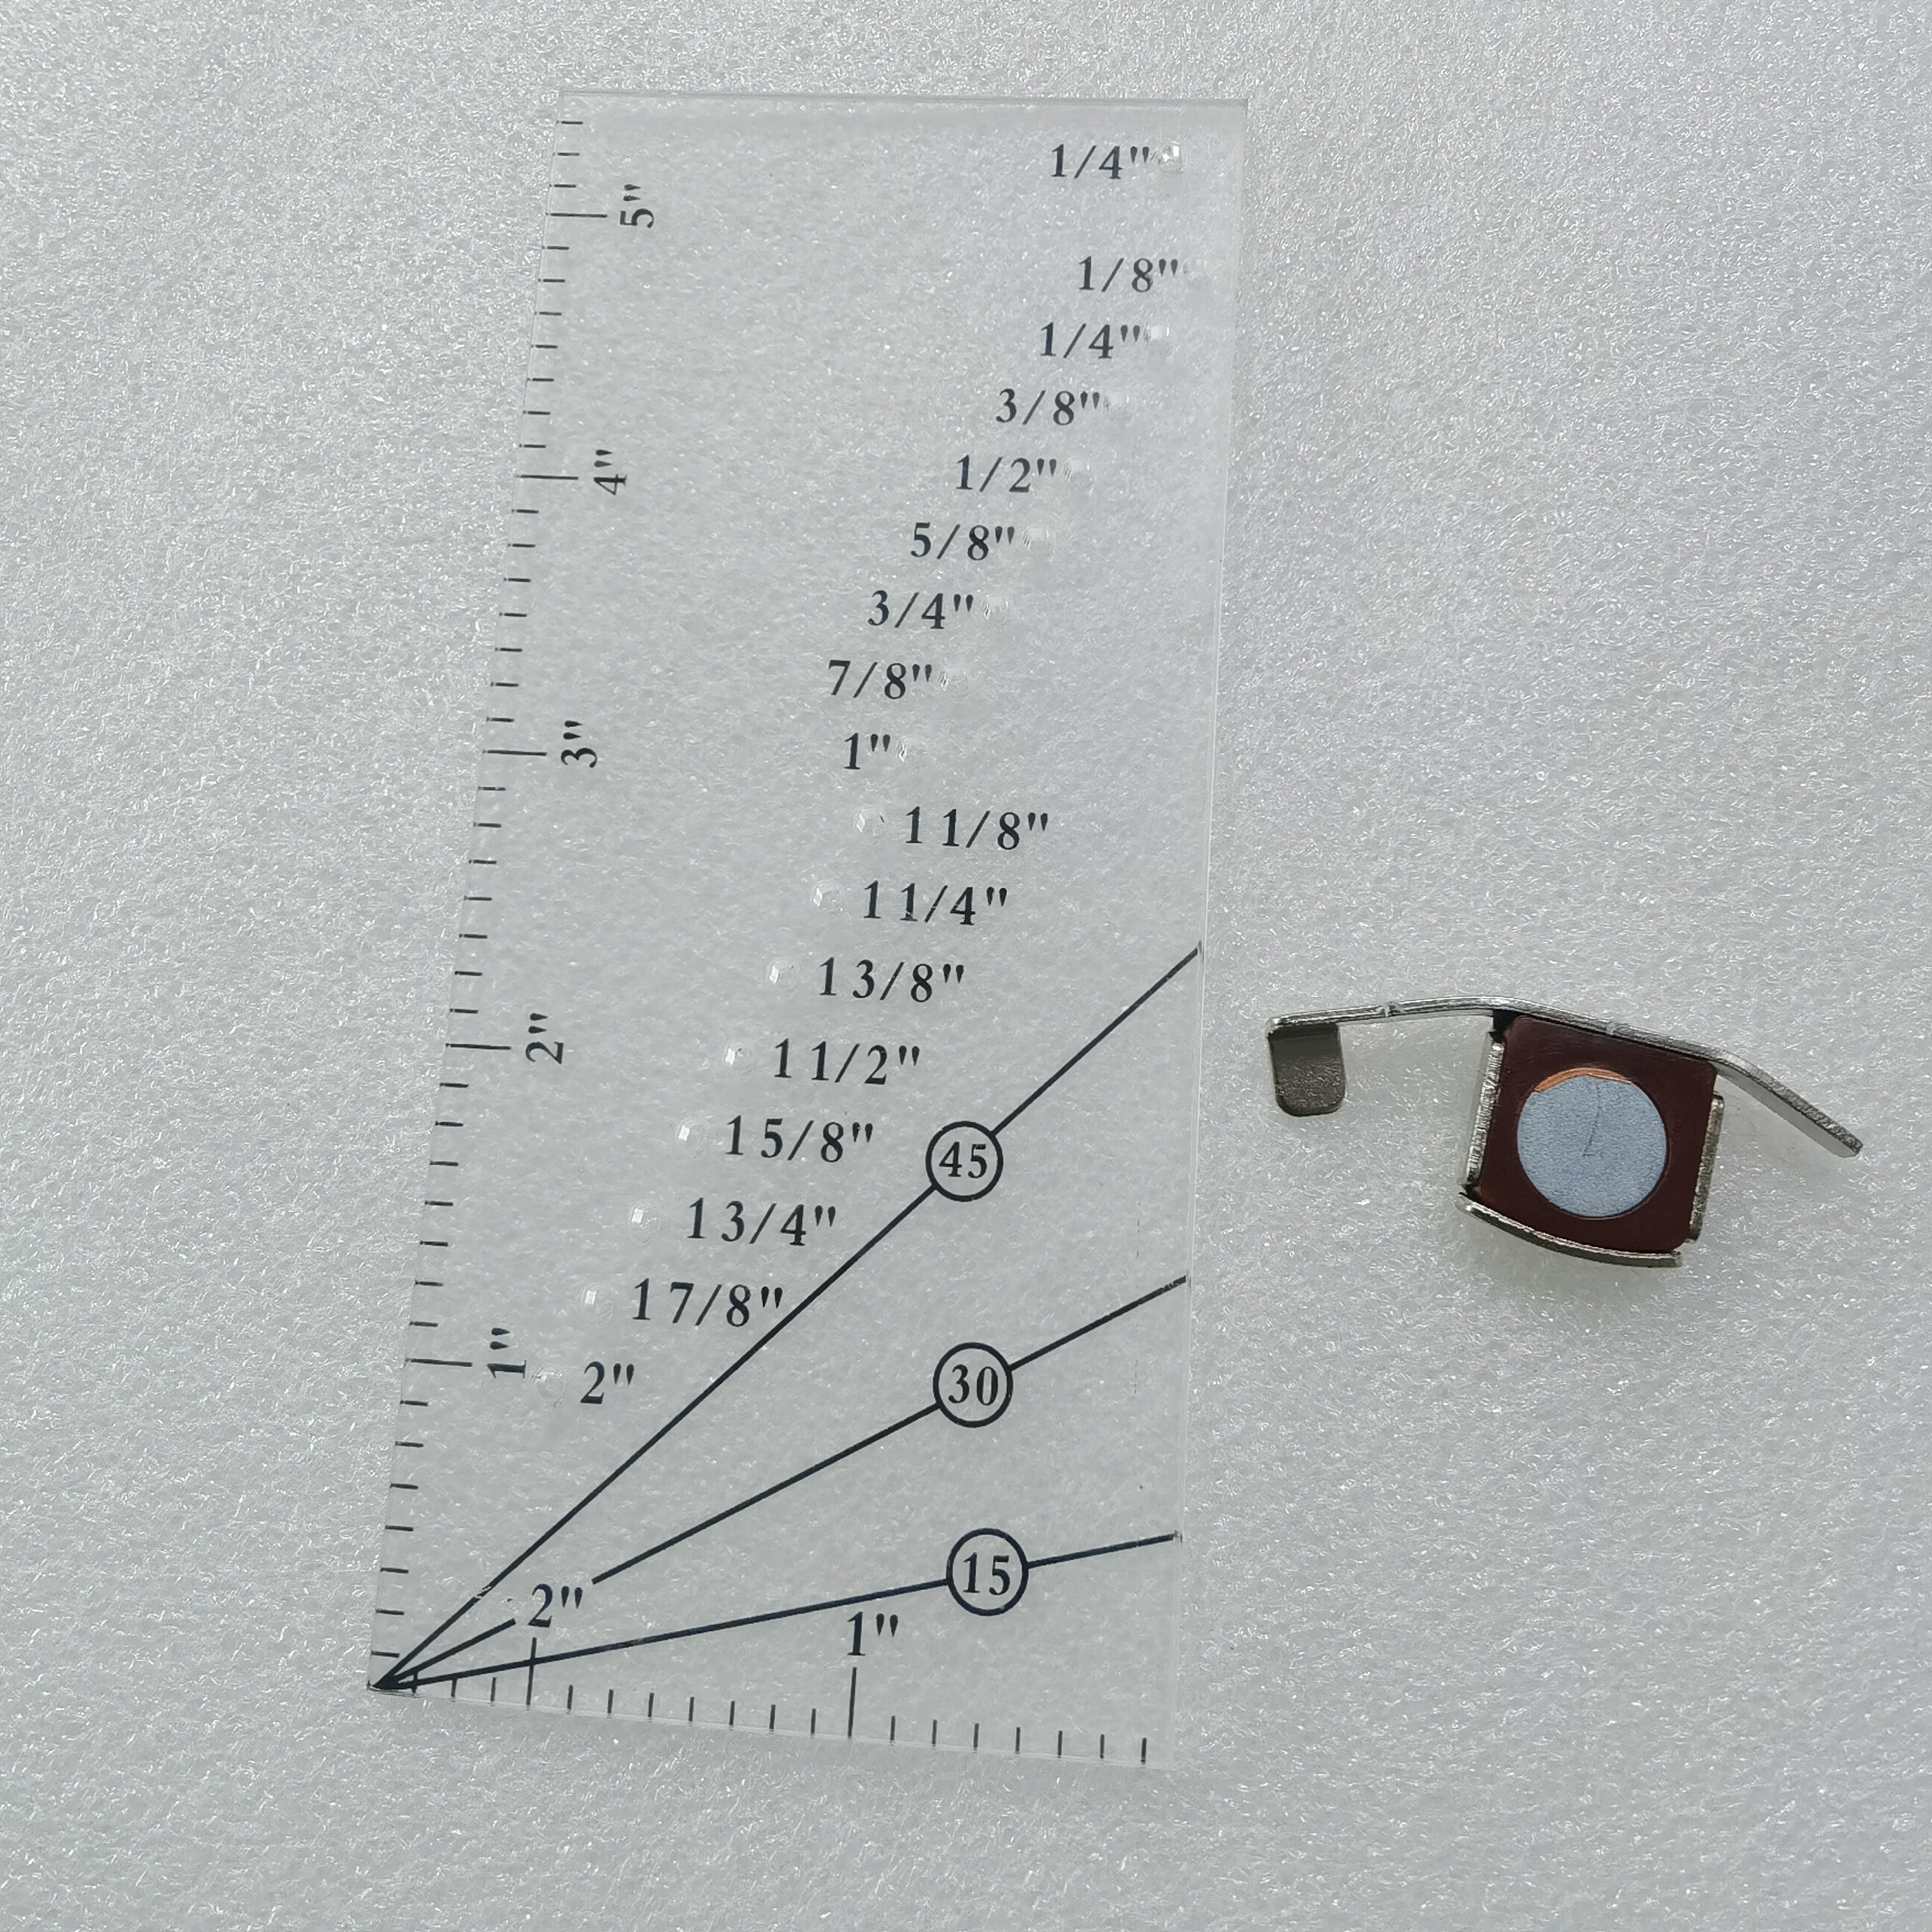 Seam Allowance Ruler And Magnetic Seam Guide For Sewing - Temu